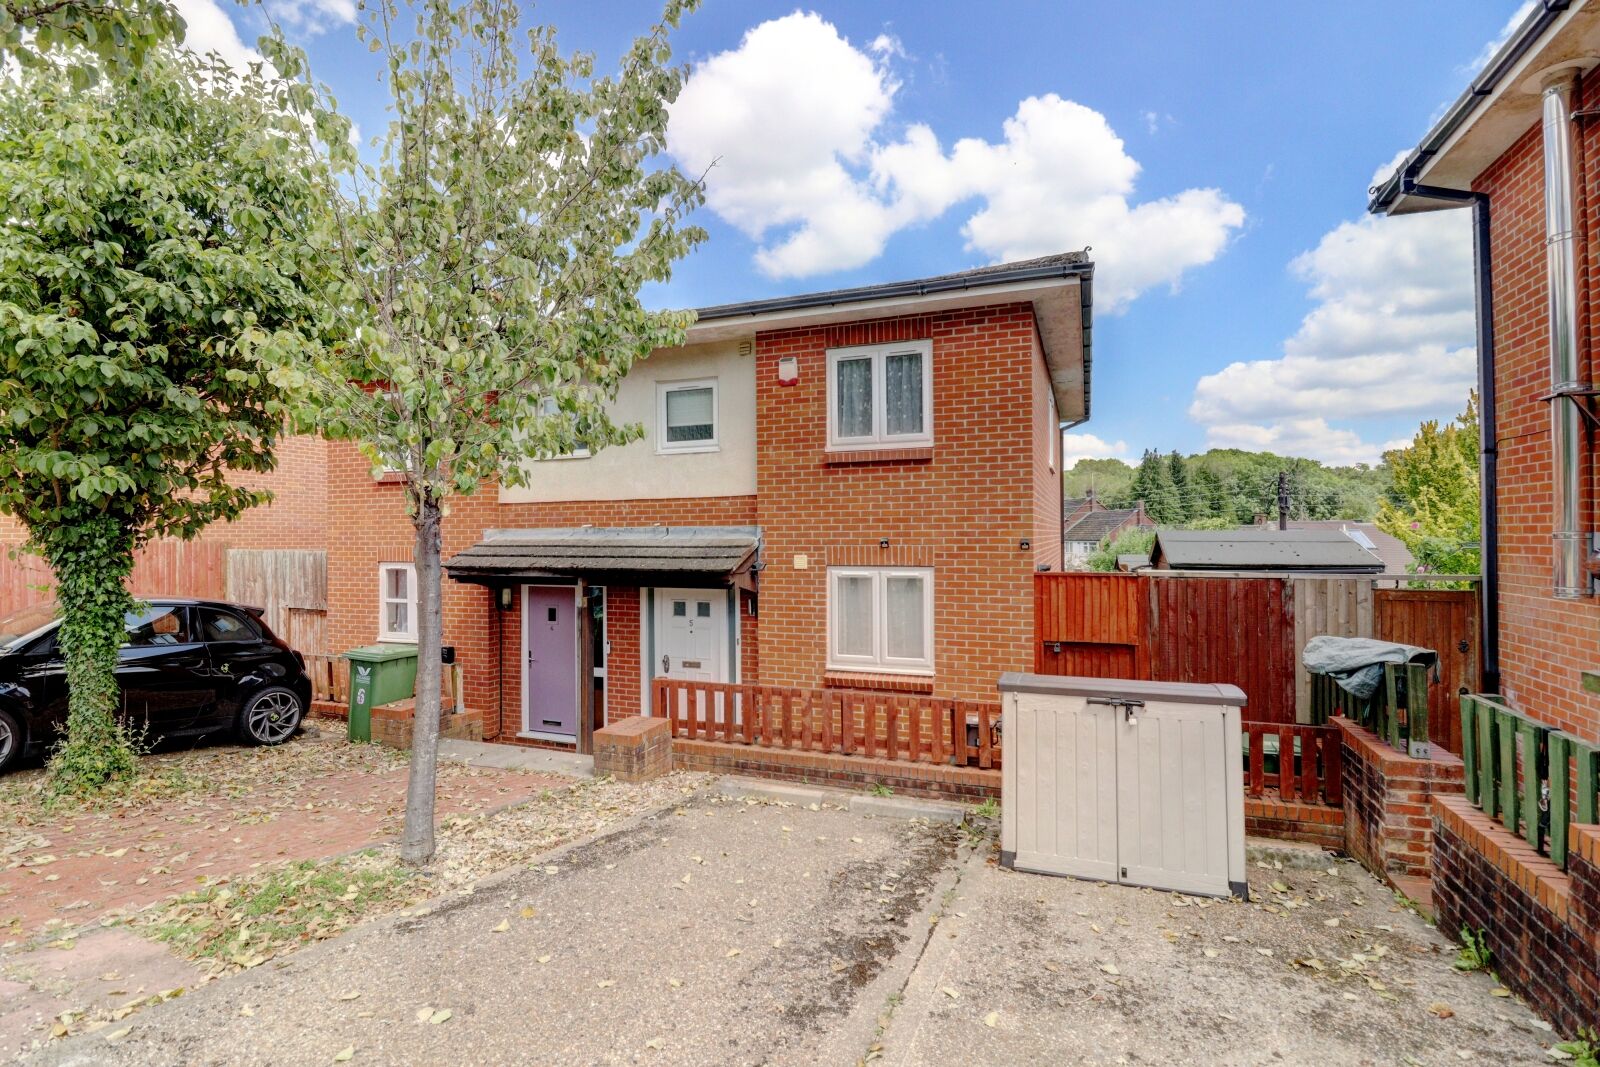 3 bedroom semi detached house for sale Barton Way, High Wycombe, HP13, main image